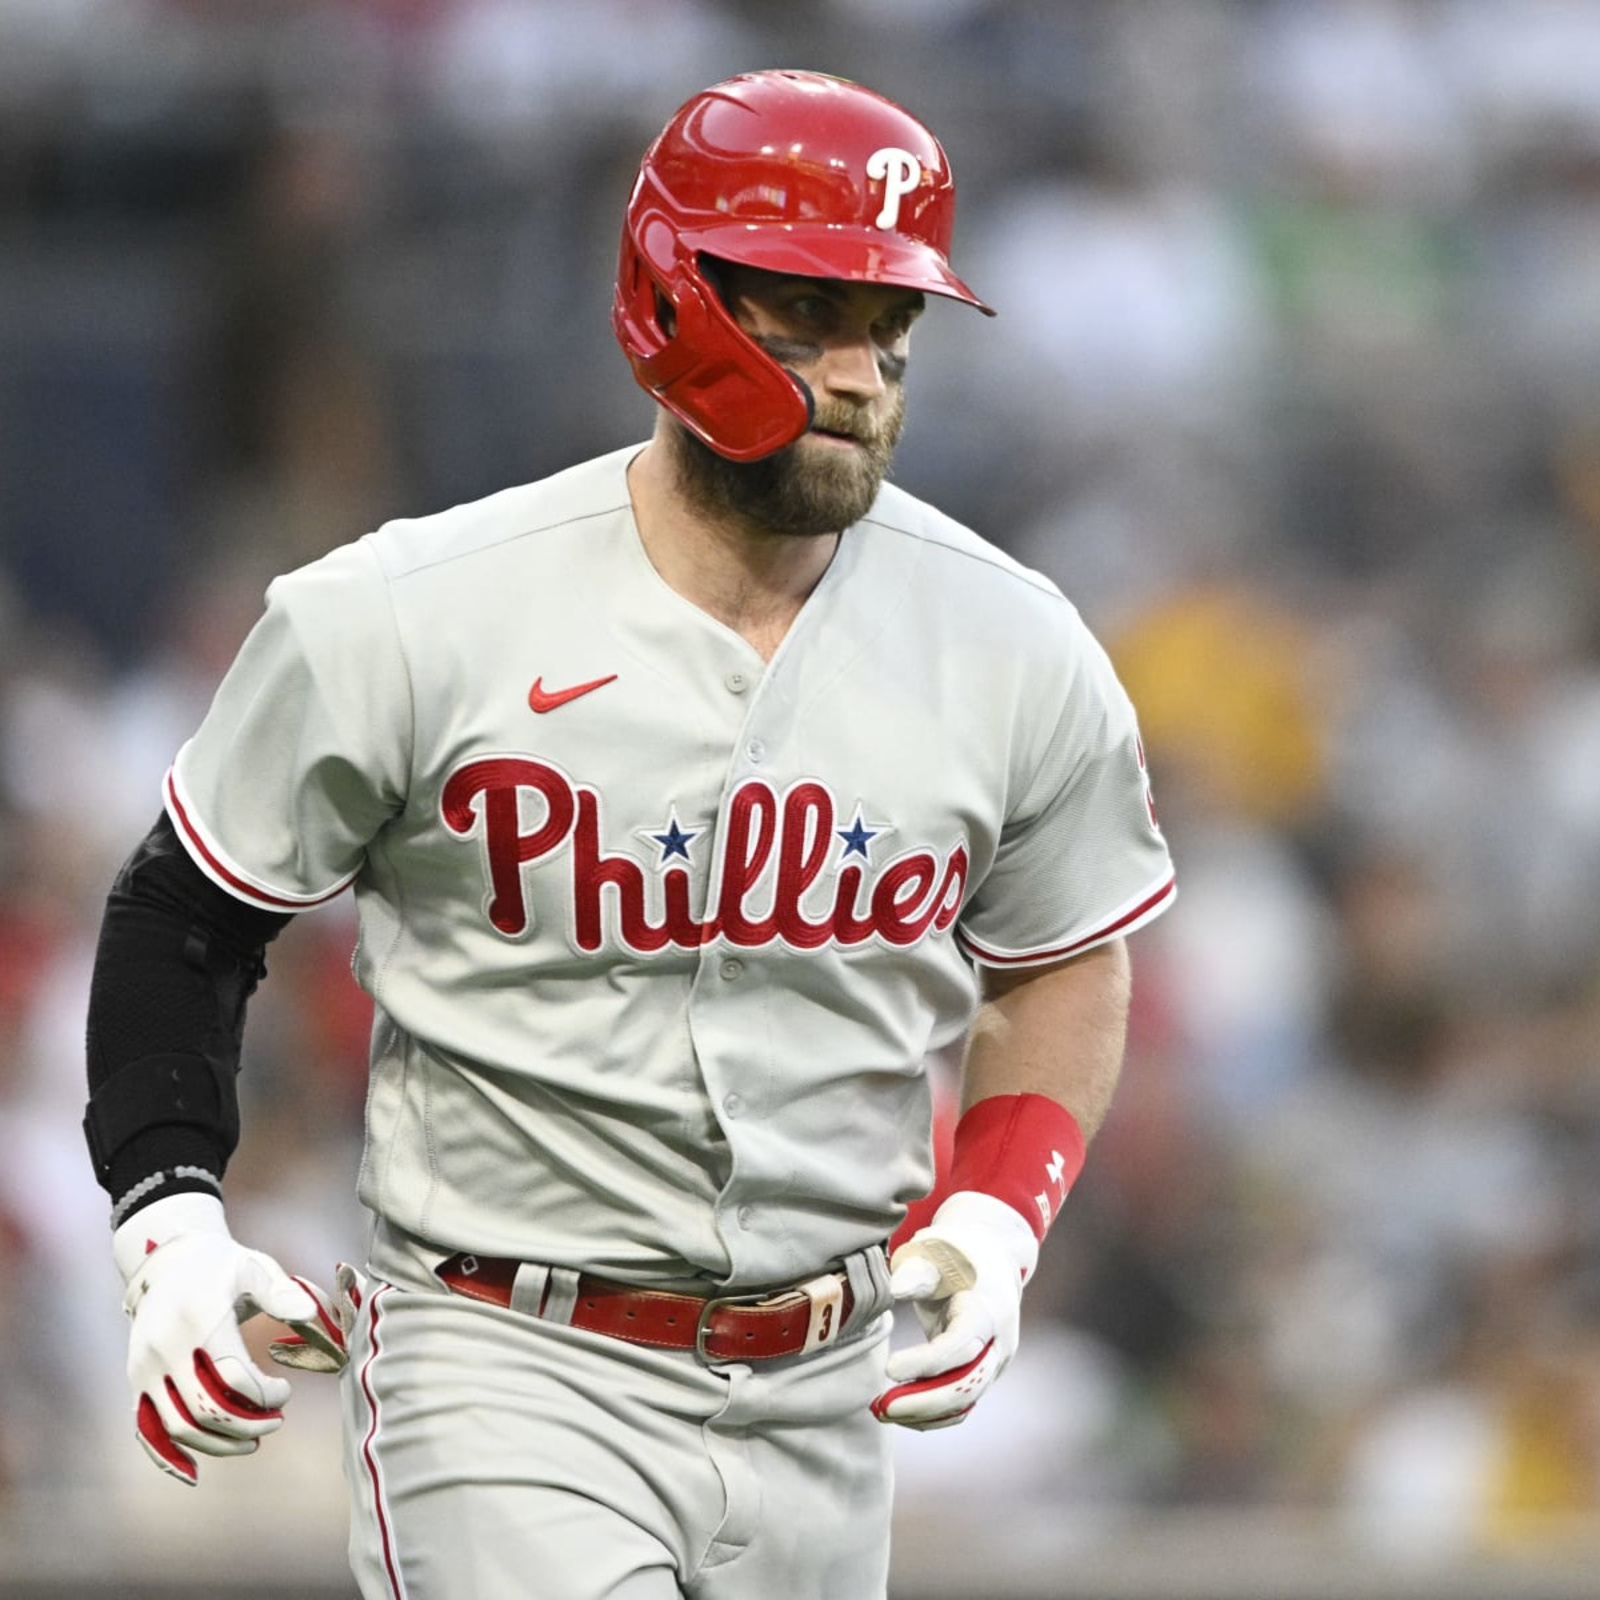 Phillies refuse to fold after Harper injury, storm back to beat